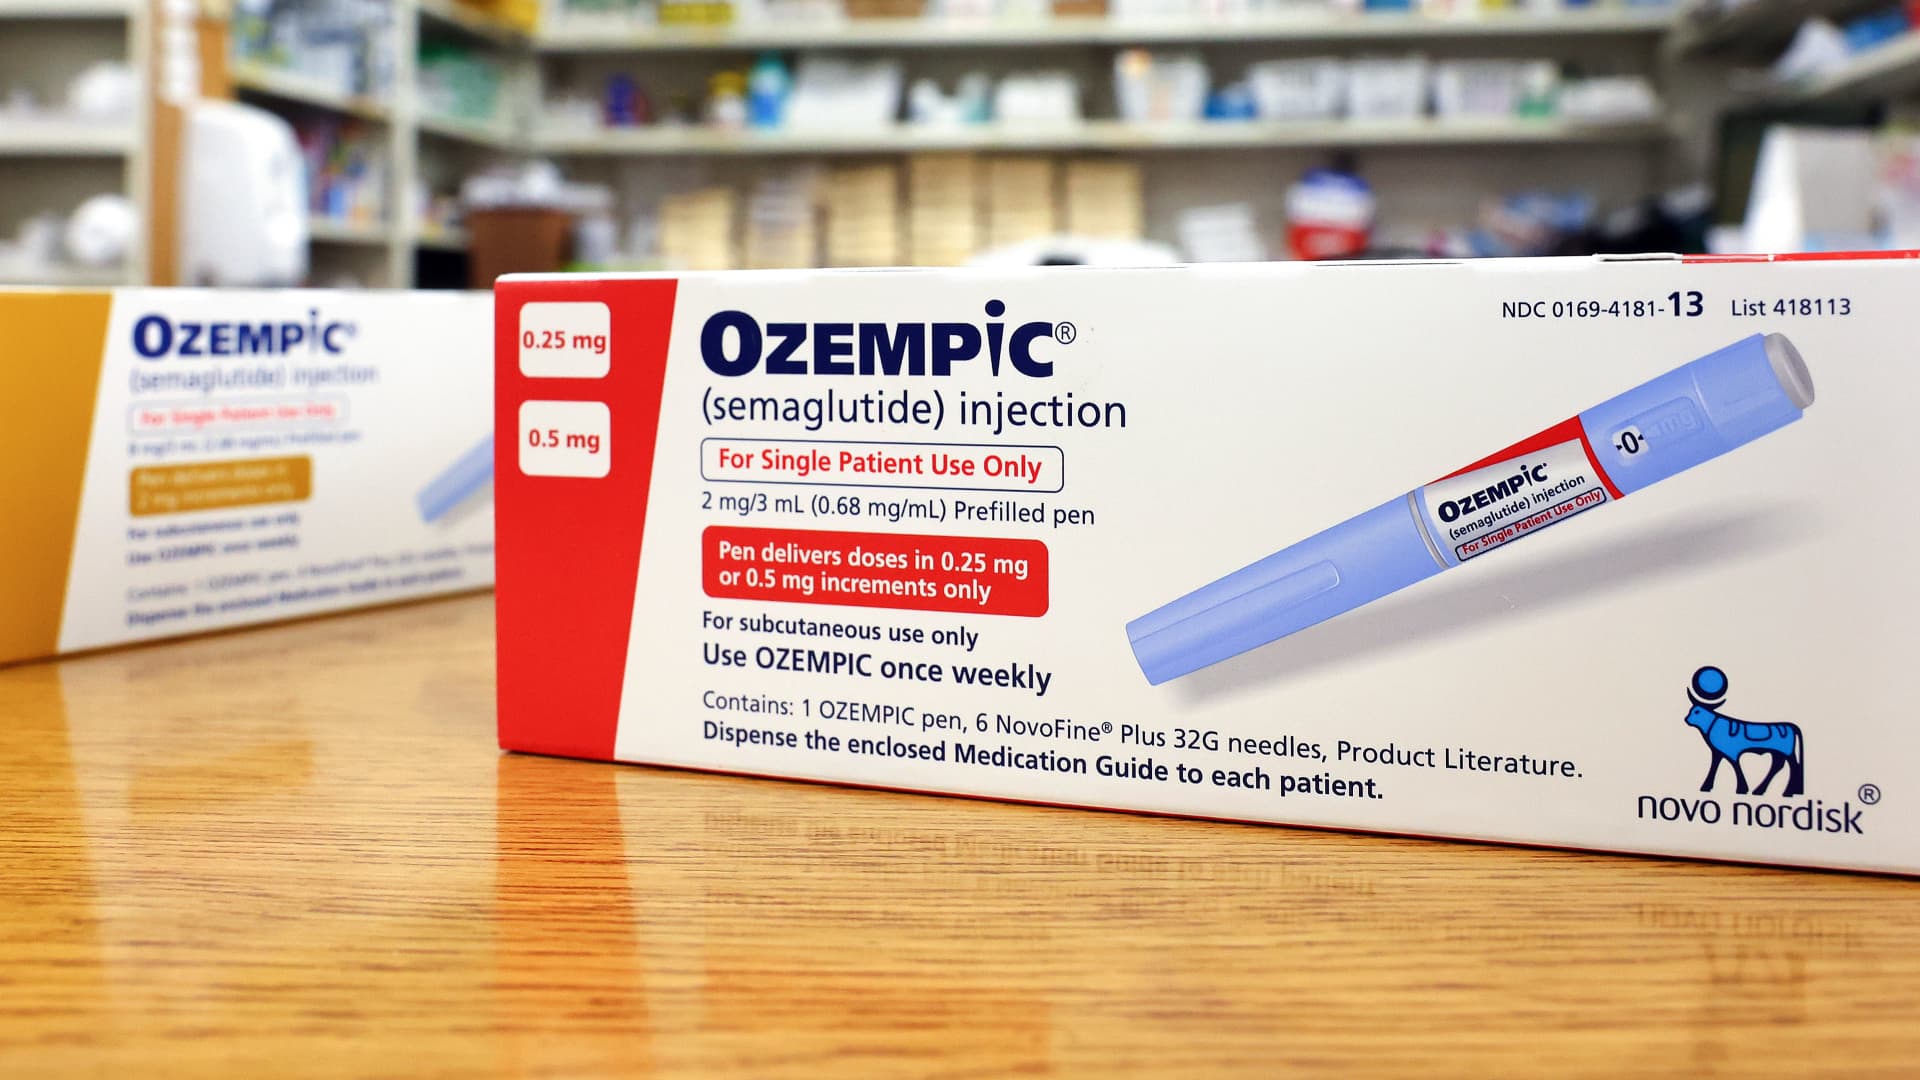 Novo Nordisk sues clinics allegedly promoting knockoff variations of Ozempic and Wegovy